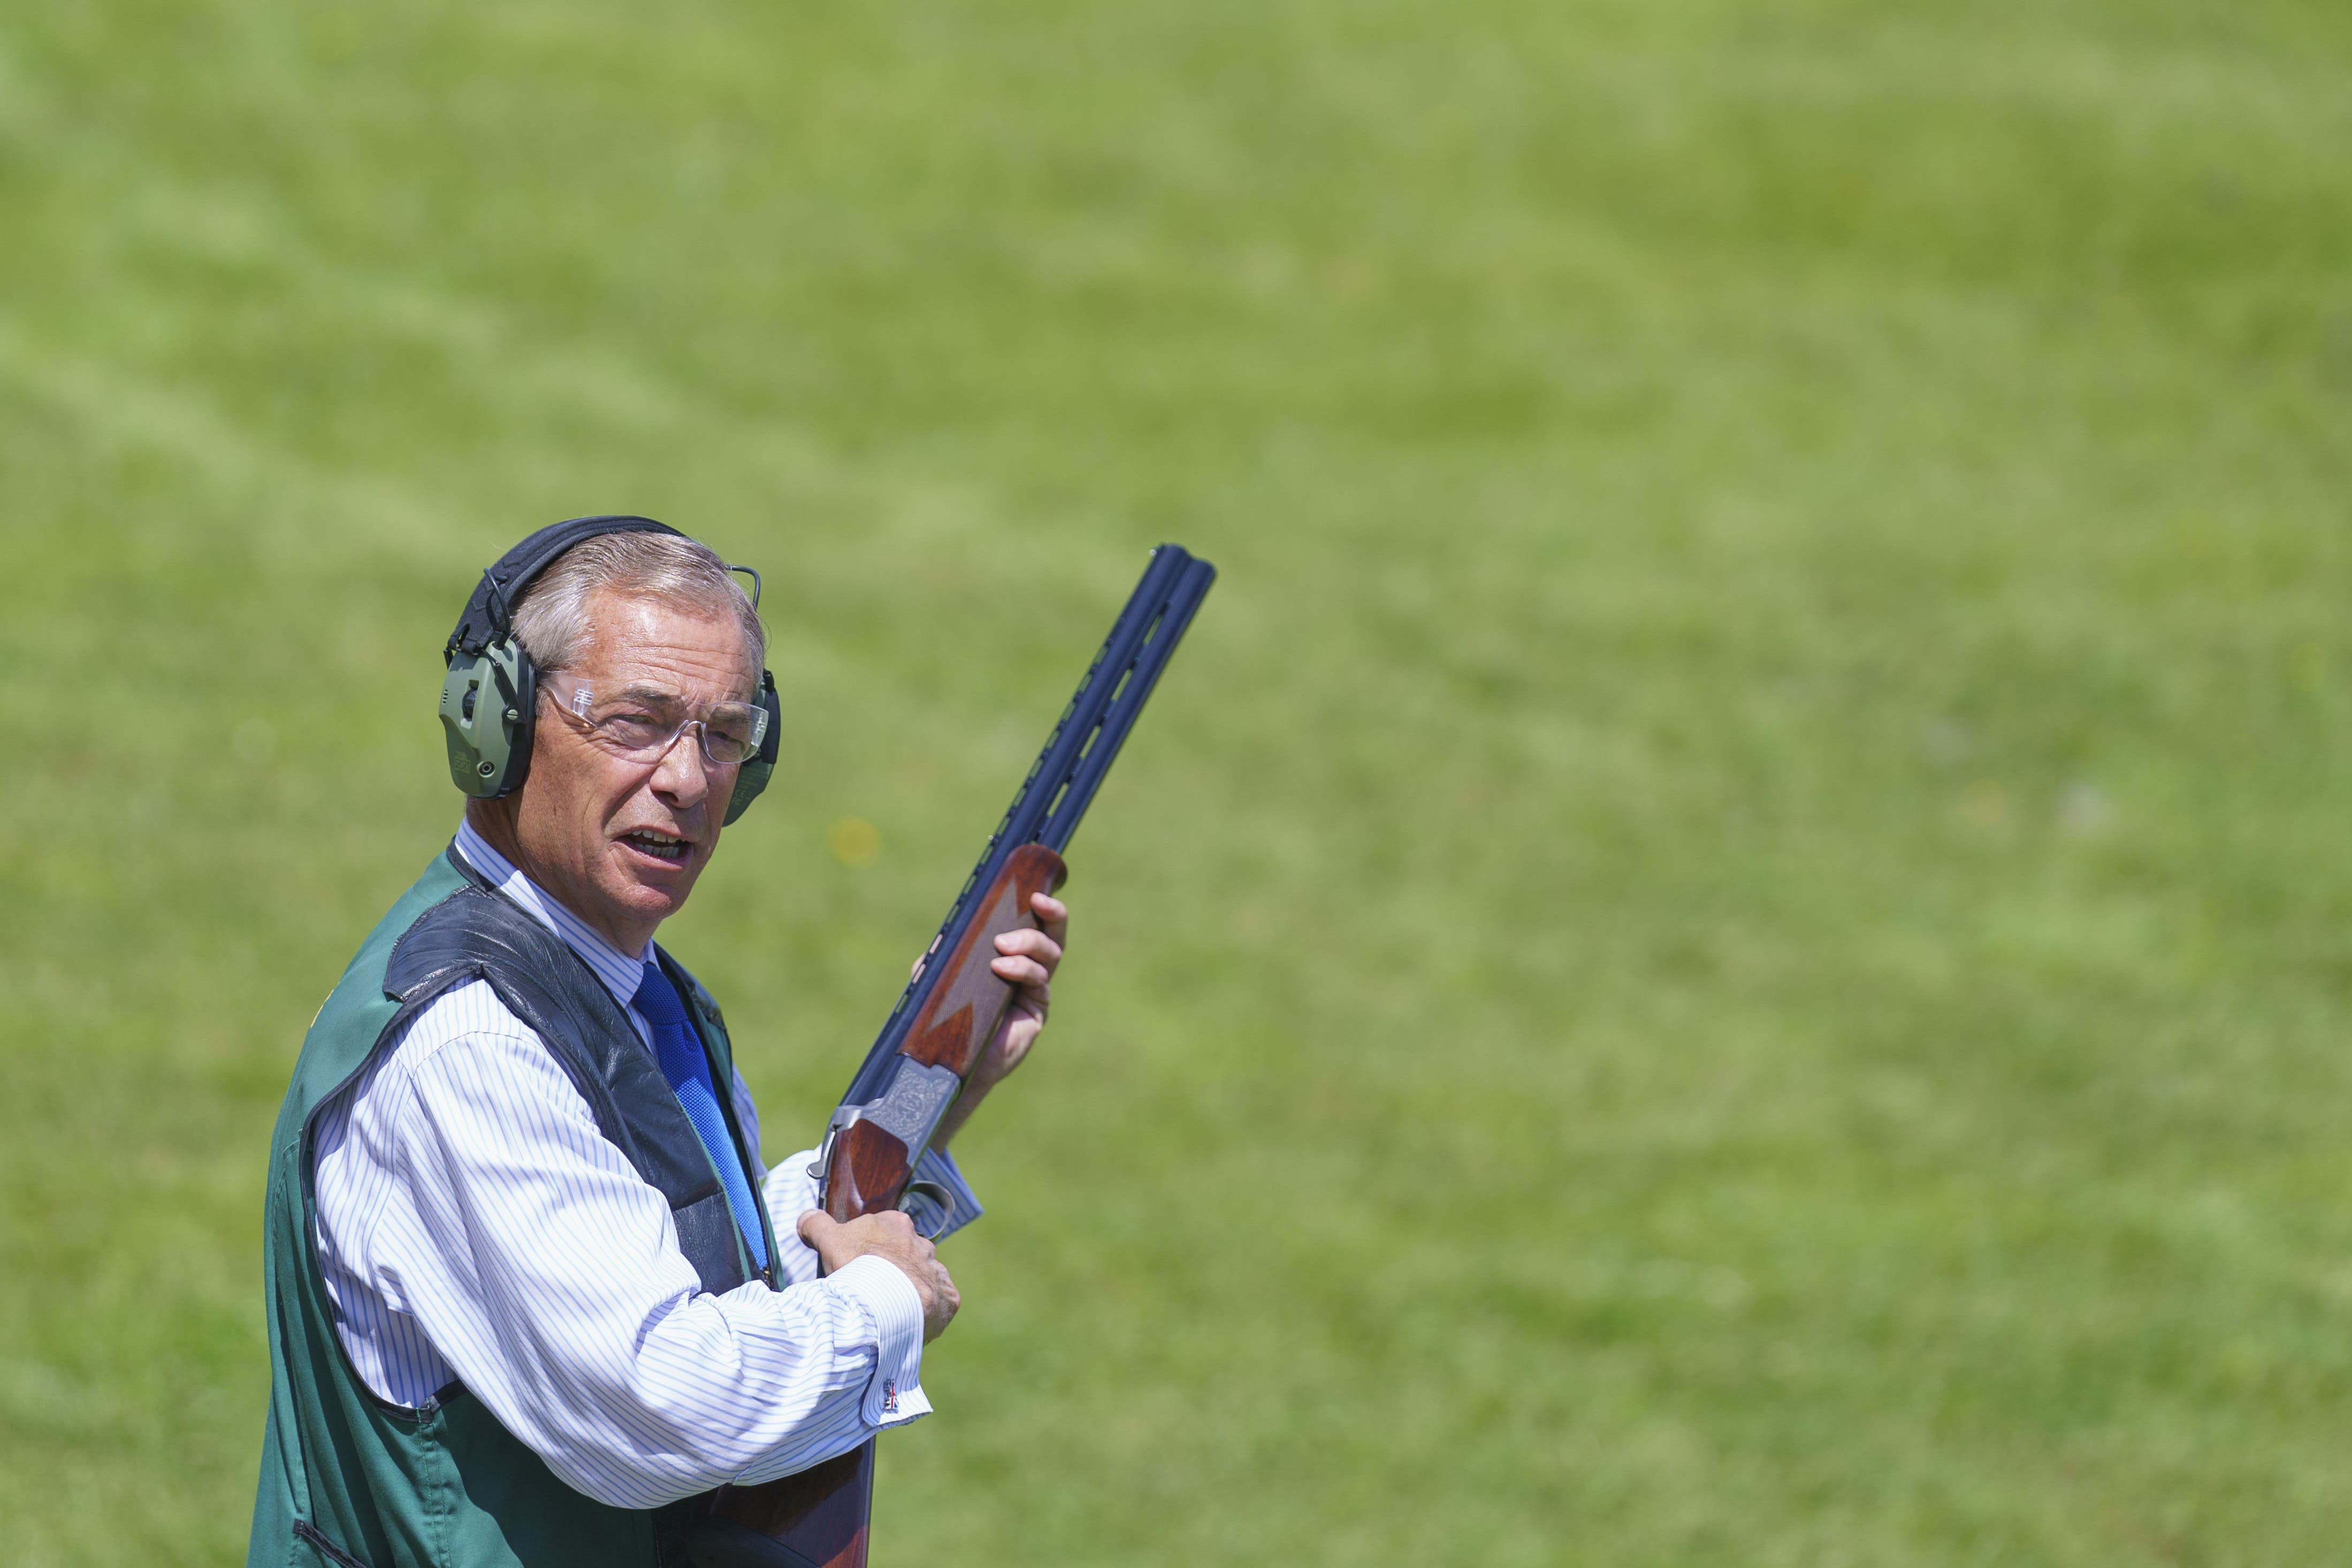 Reform UK leader Nigel Farage takes part in clay pigeon shooting during a visit to Catton Hall in Frodsham, Cheshire (Dominic Lipinski/PA)